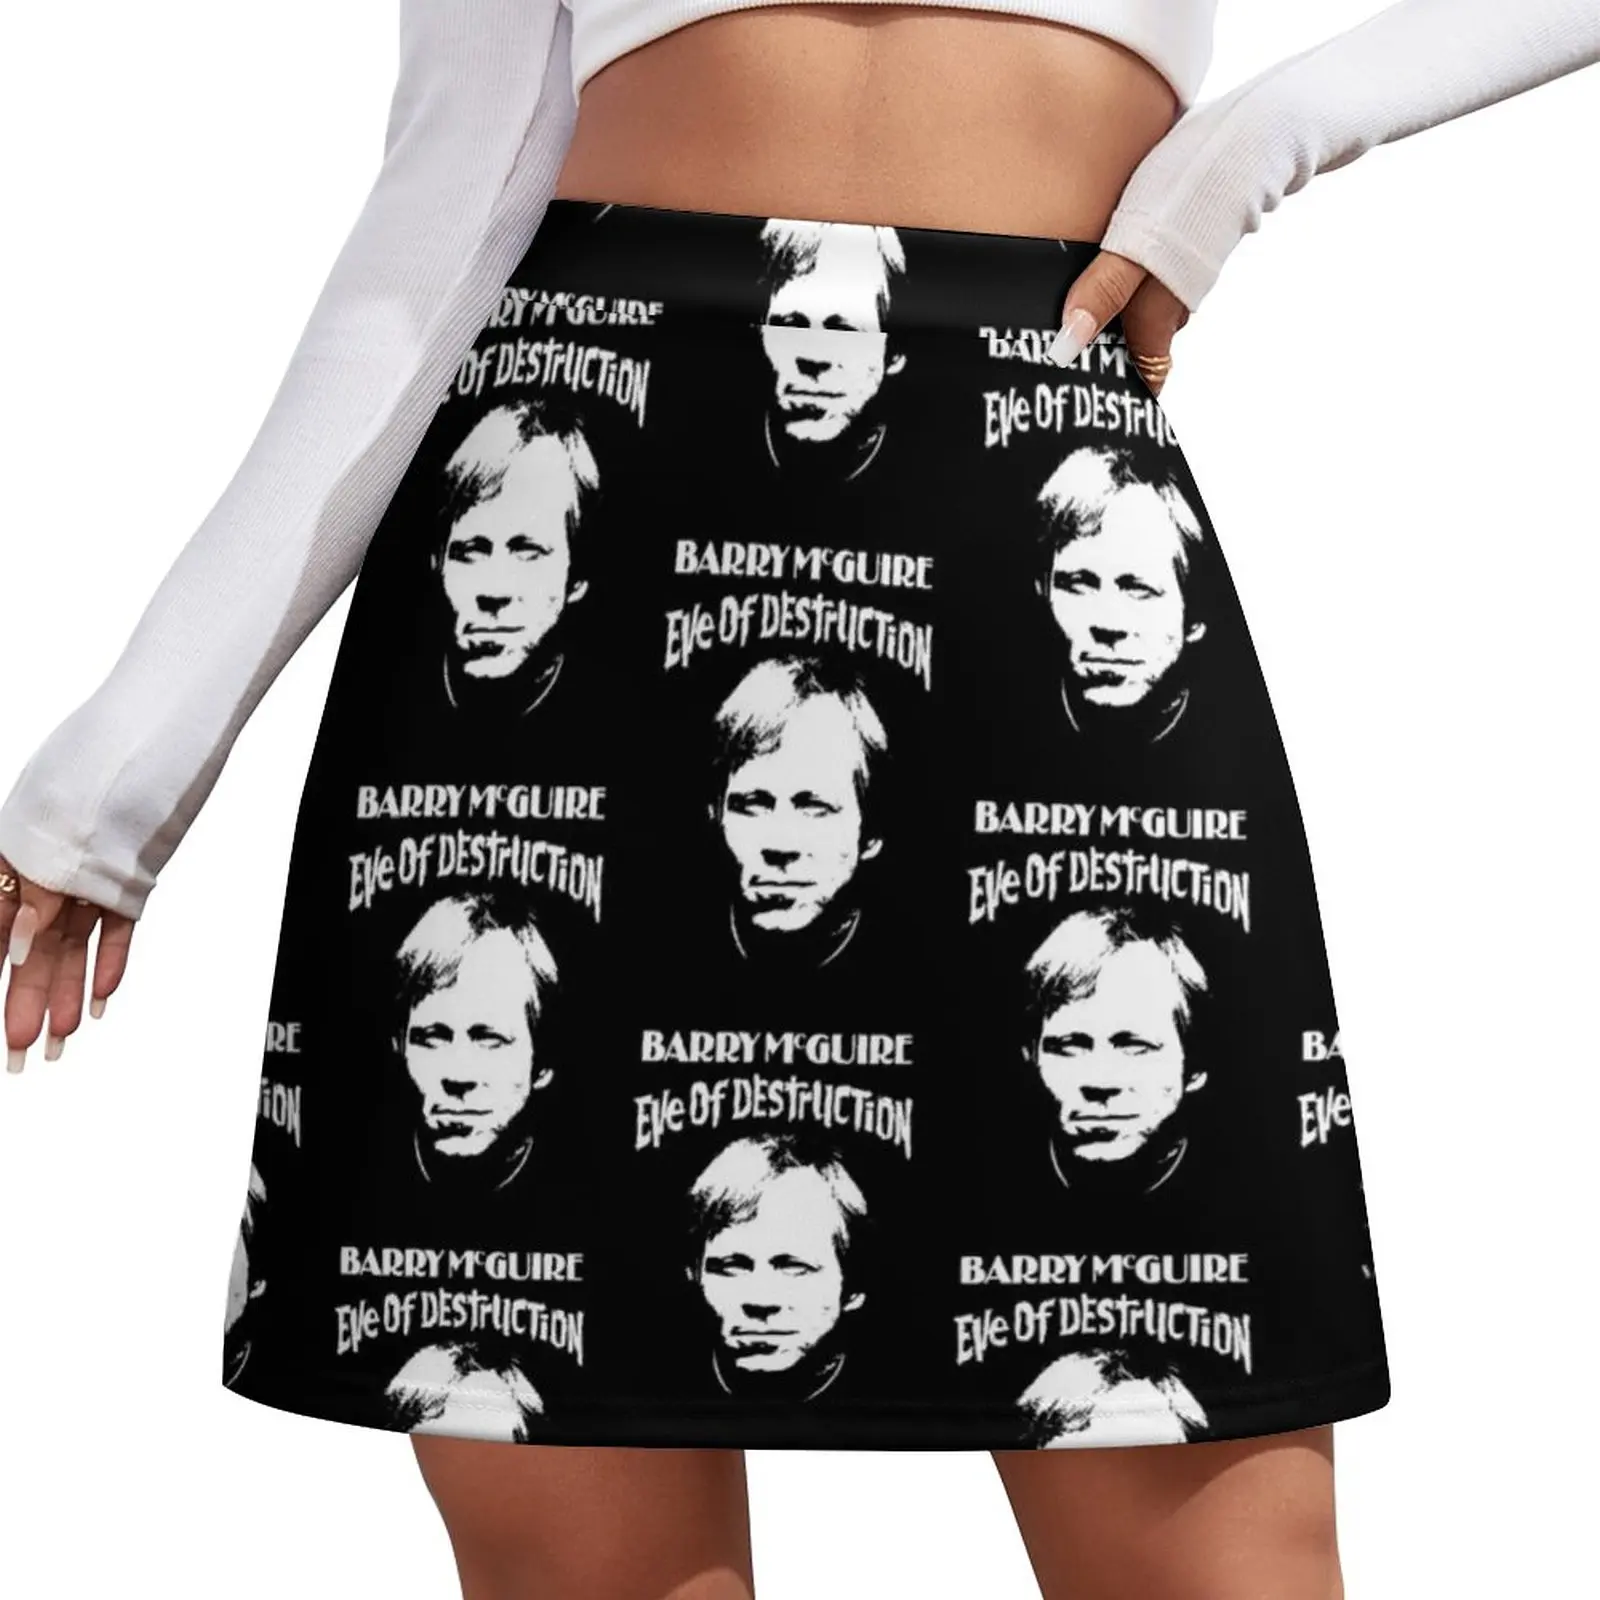 

Barry McGuire: Eve Of Destruction Mini Skirt novelty in clothes Womens dresses